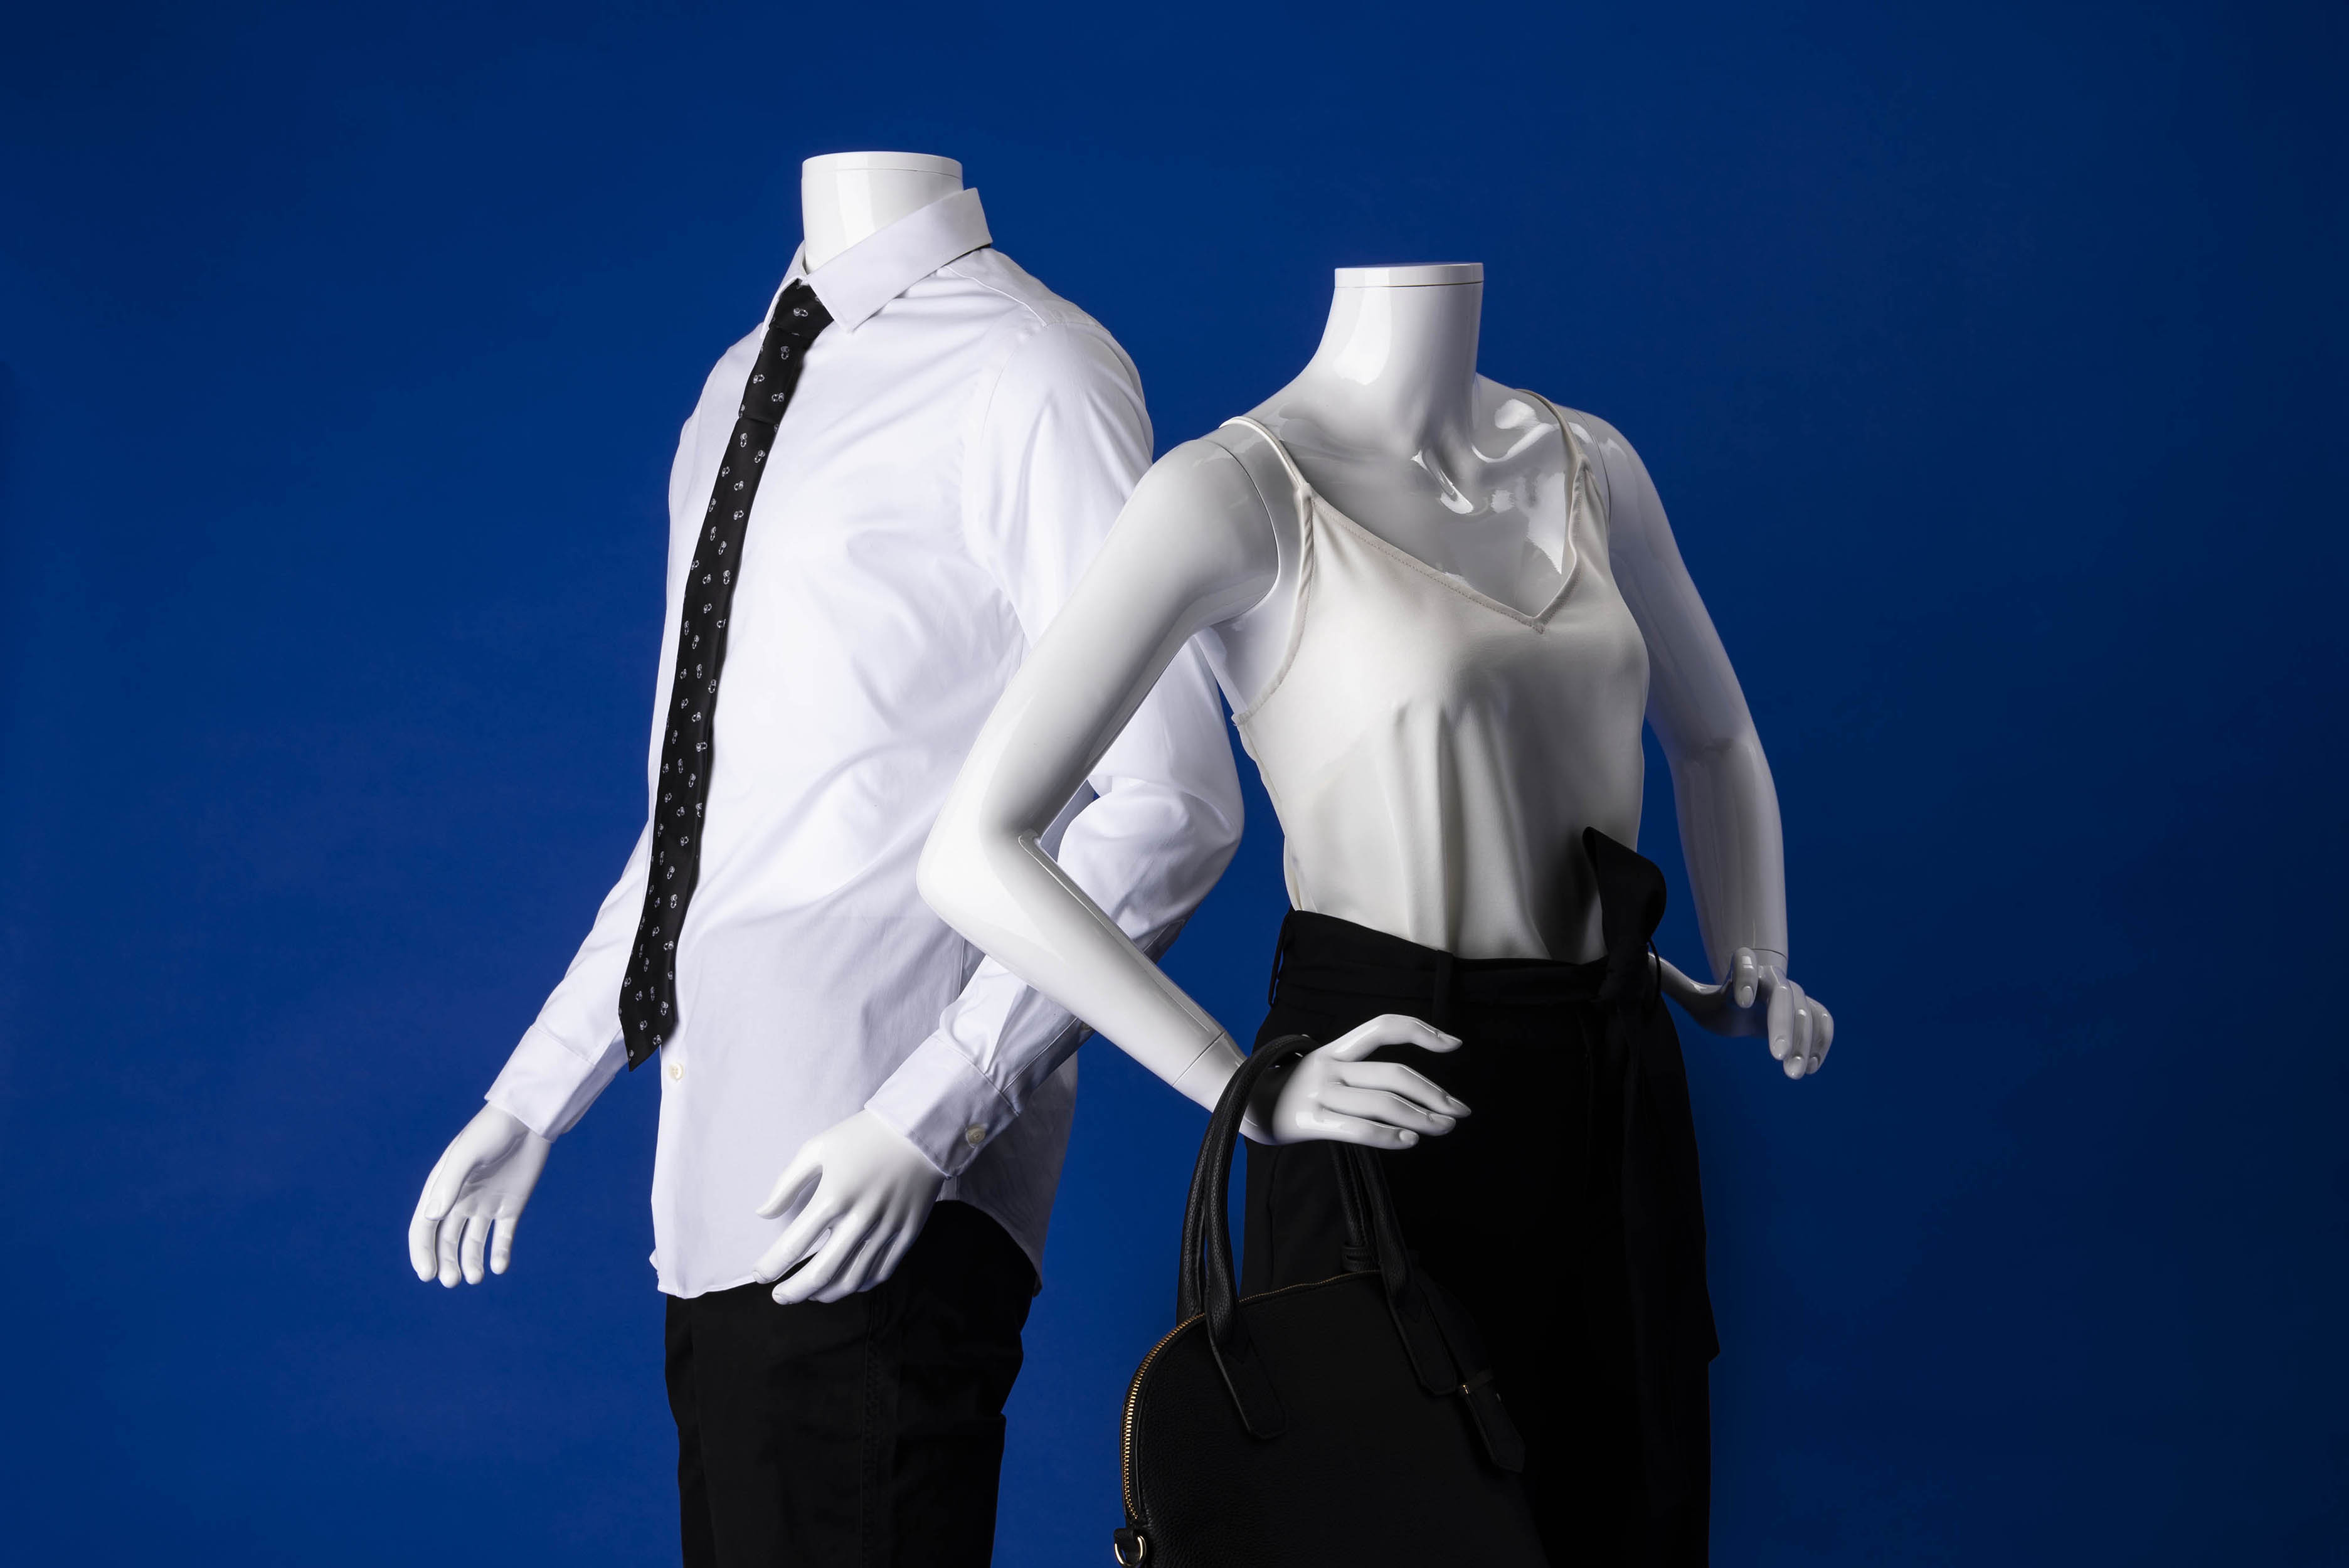 Headless abstract mannequins with glossy white finish